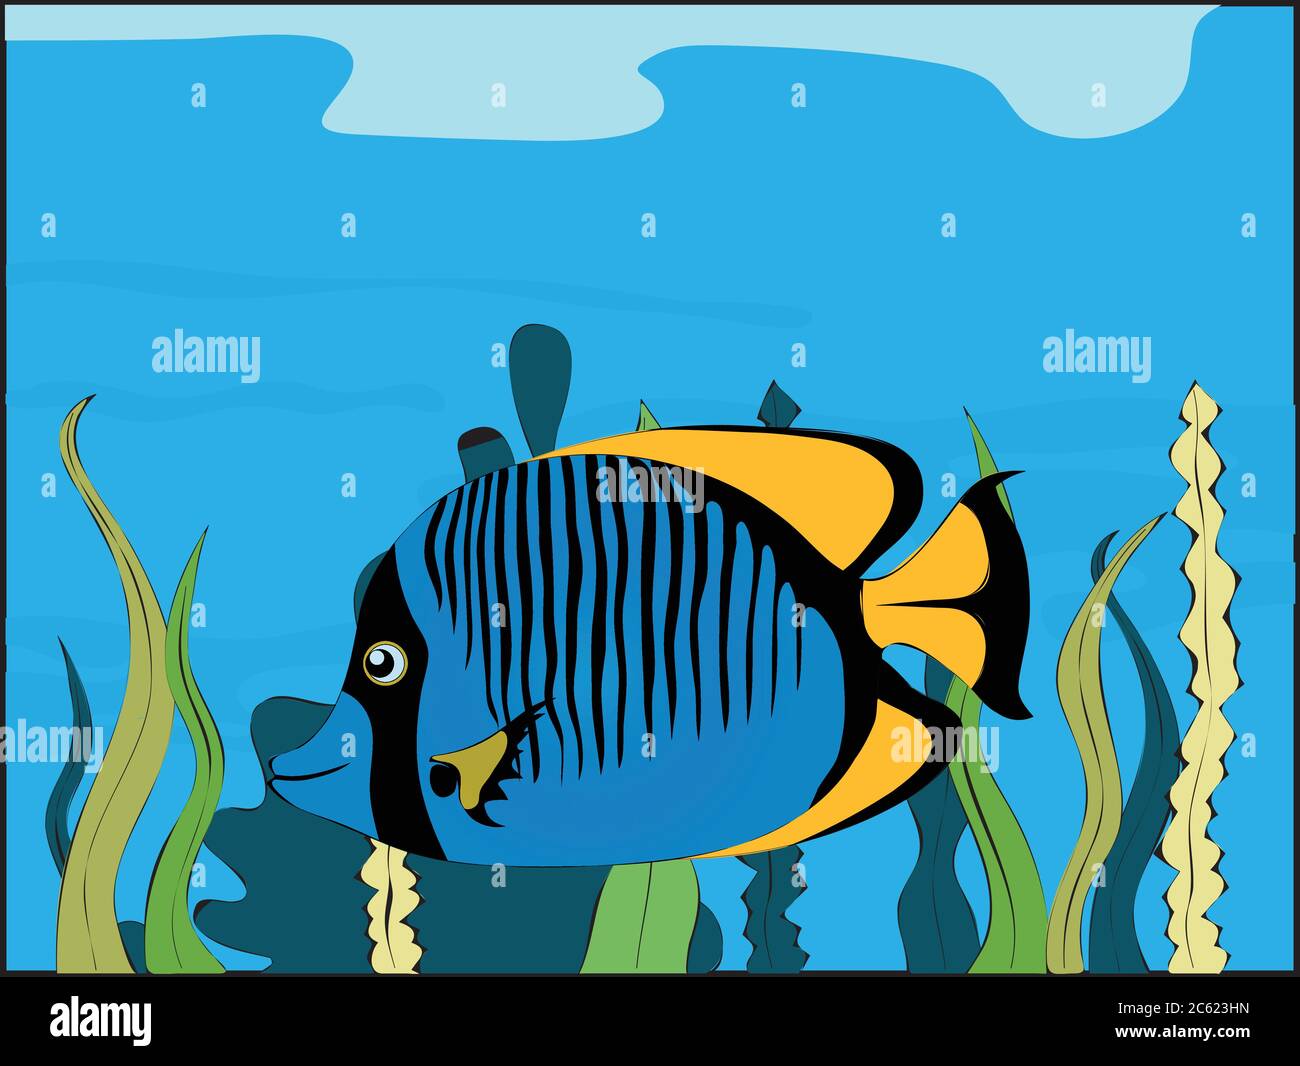 Hand Drawn Blue Fish With Black Stripes And Yellow Fins Underwater With Sea Vegetation Background Stock Vector